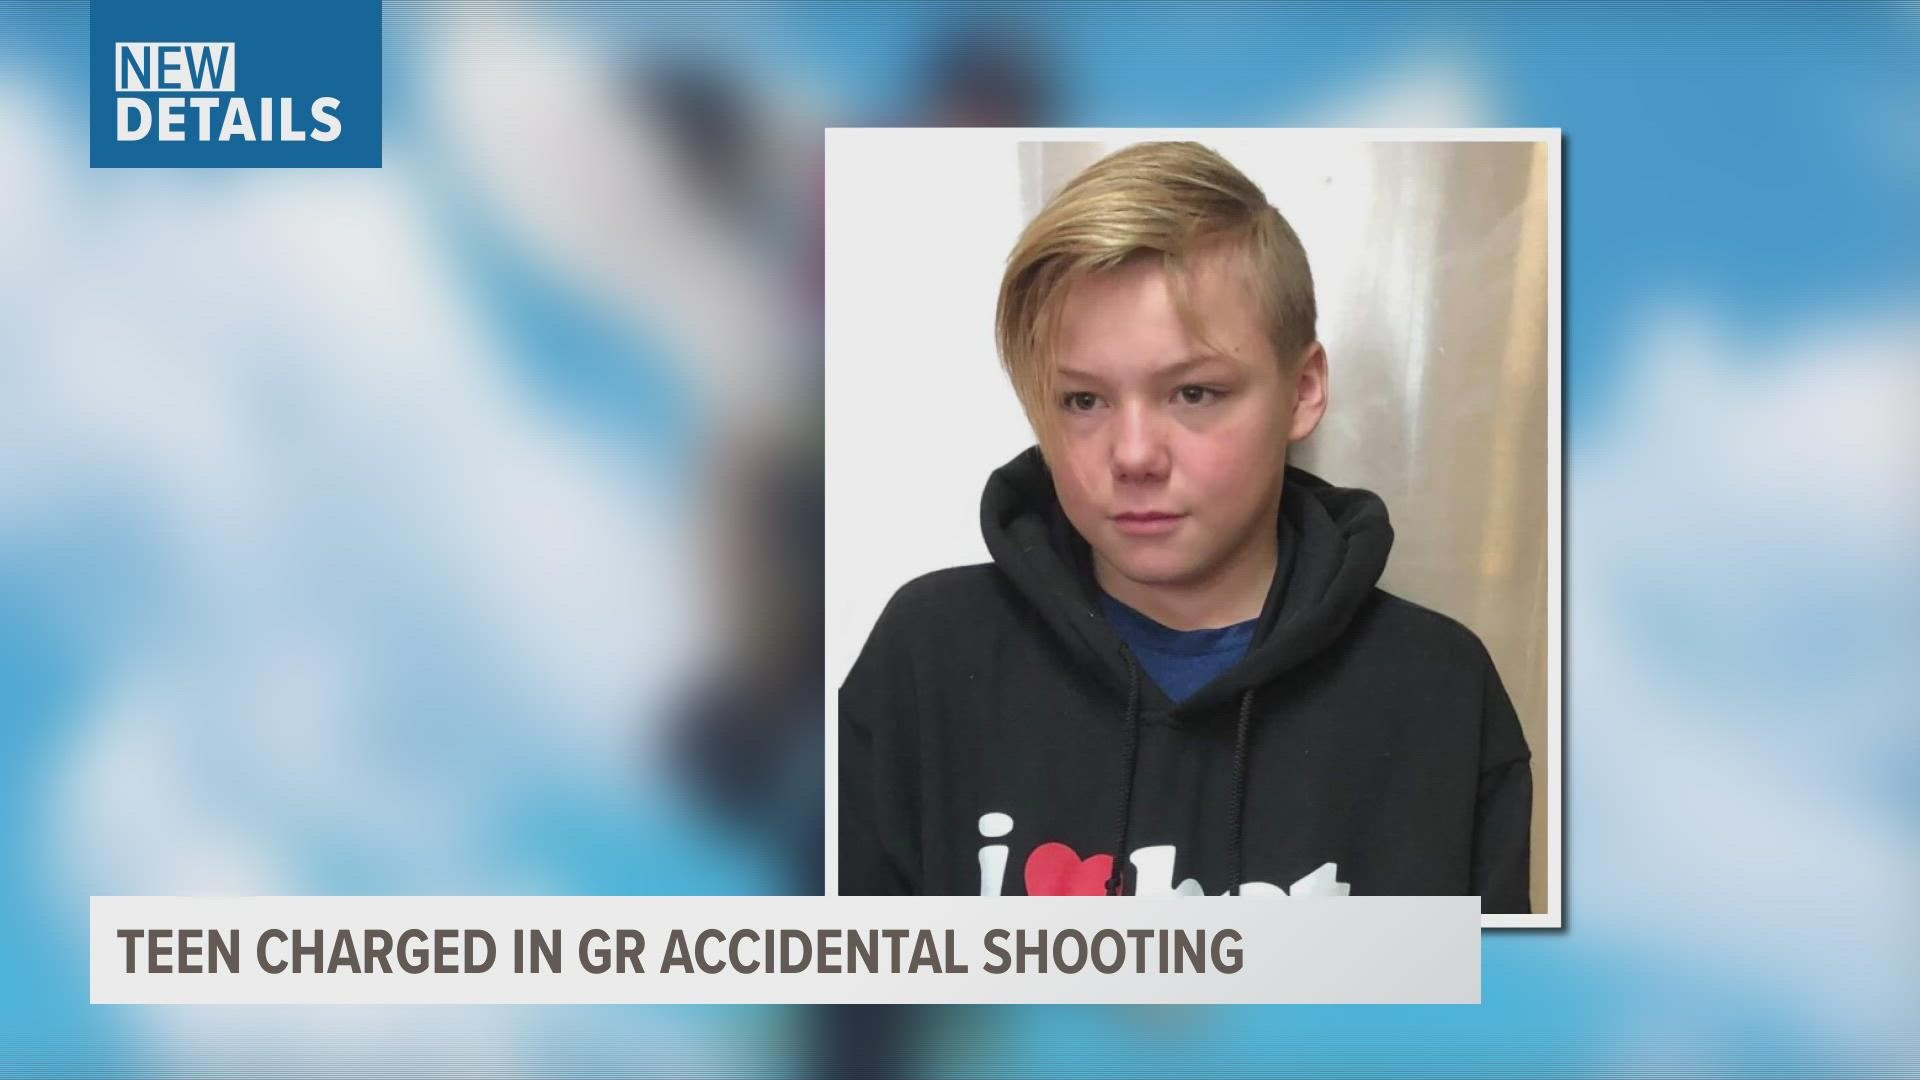 The teen has been charged with careless discharge causing death after 13-year-old Gabriel Hojnacki was accidentally shot and killed on Saturday.